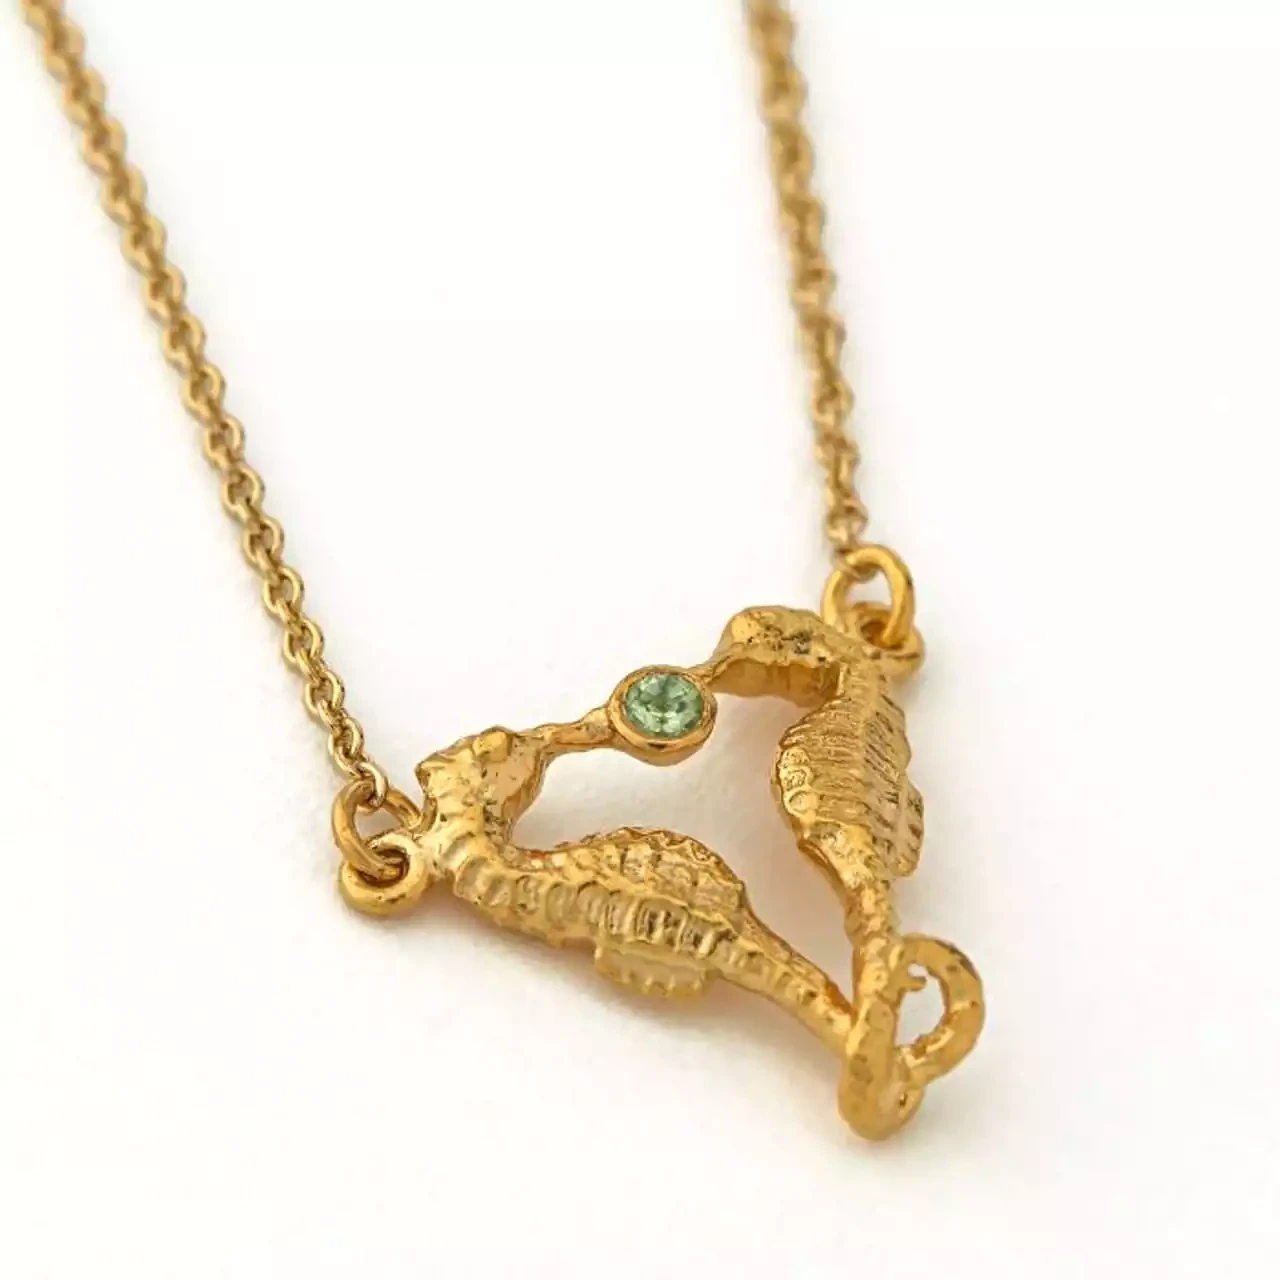 Seahorse Companion Necklace - Gold Plated with Peridot by Alex Monroe